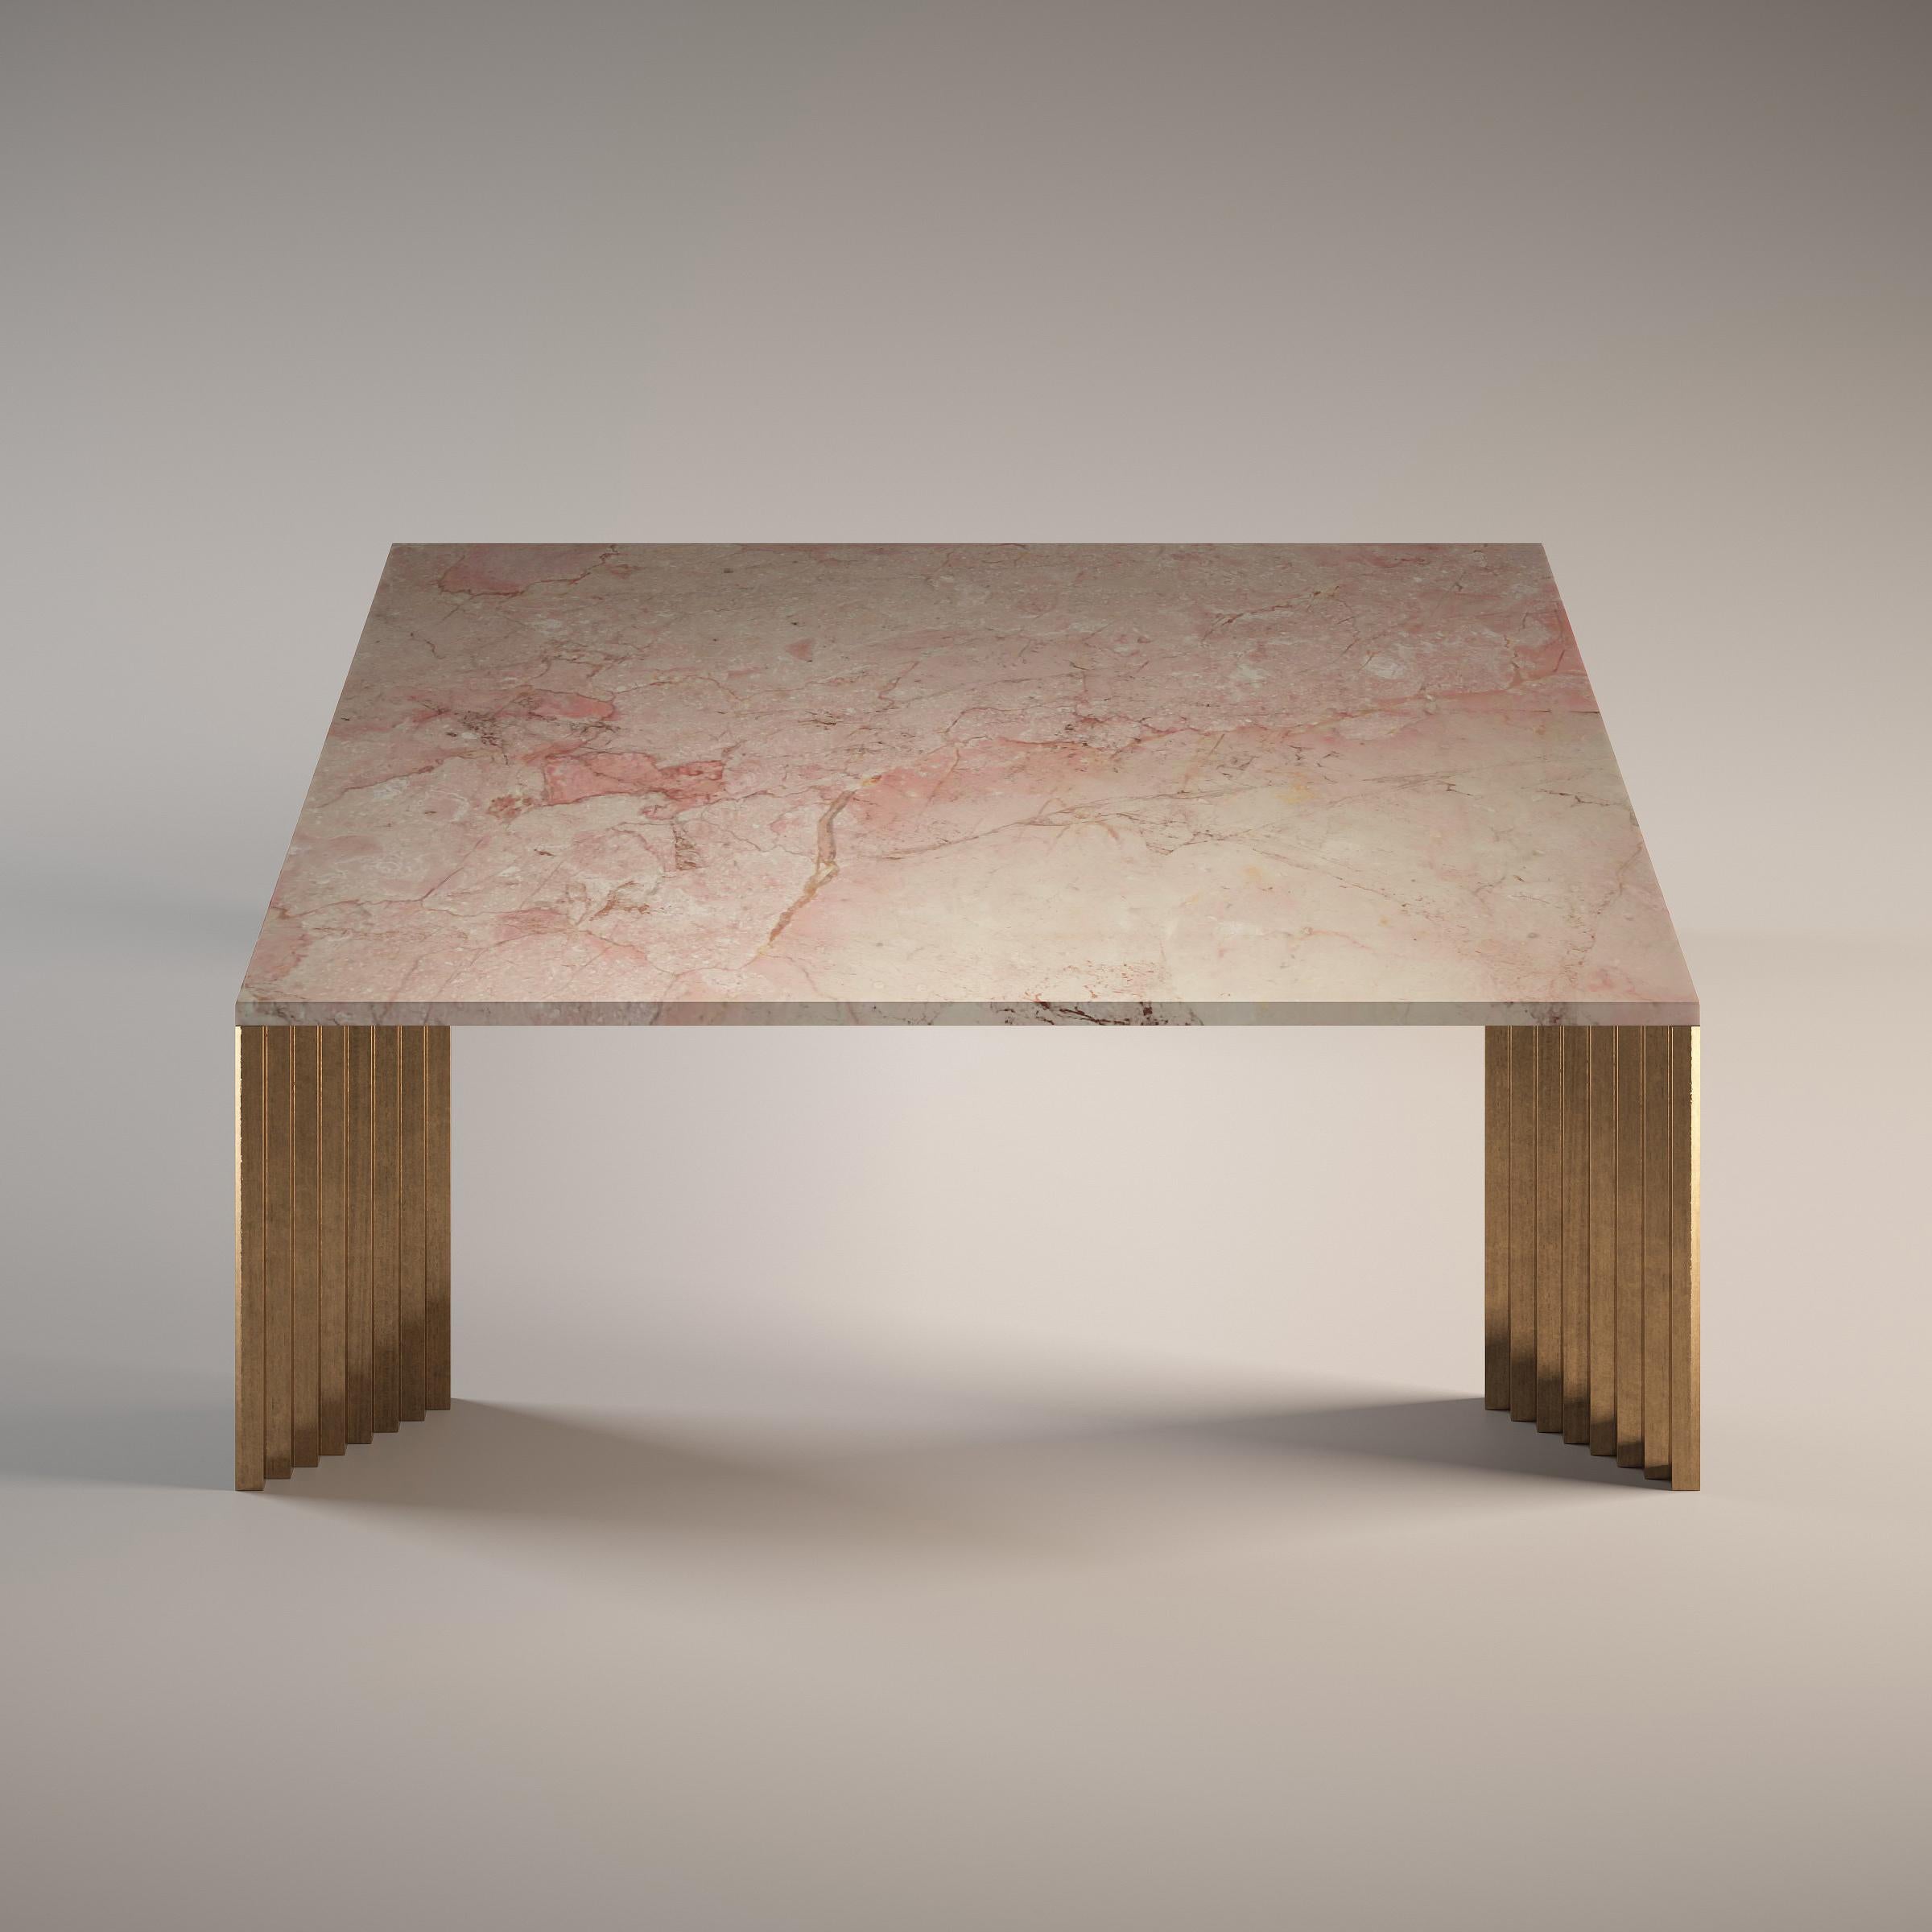 Piero Rosa Tea Coffee Table by Fred and Juul
Dimensions: D 120 x W 120 x H 40 cm.
Materials: Rosa Tea marble and bronze.

Available in White Carrara, Rosa Tea or Emperador Grey marble tops. 
Available in bronze or aluminum legs. Custom sizes,